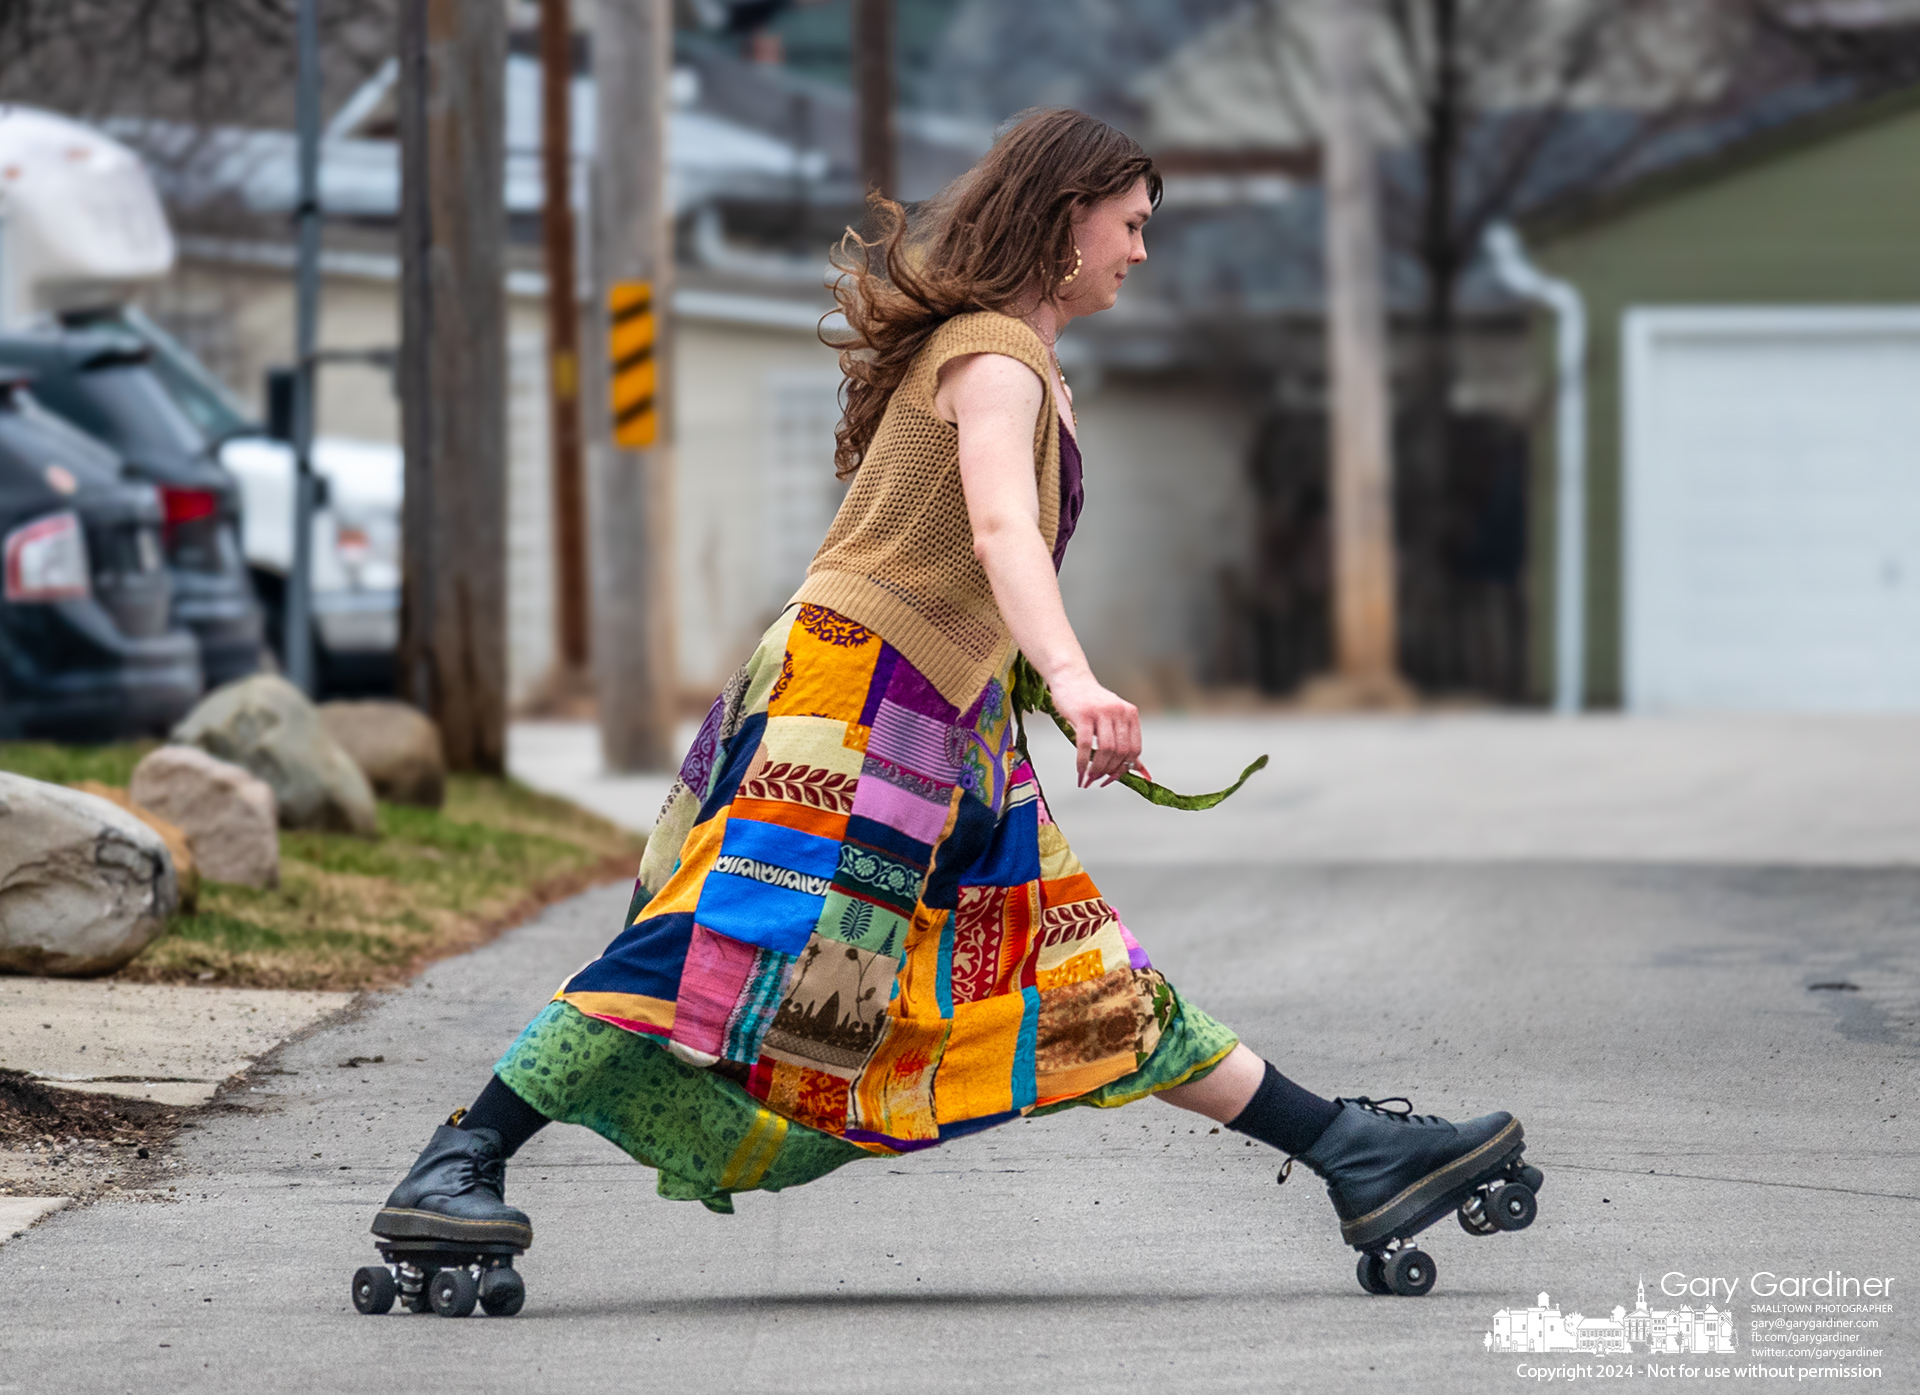 Kadin runs her skates crisscross over Haywood Alley in Uptown enjoying both the warm February weather and the smooth surface of the roadway to help relieve stress and get some exercise. My Final Photo for February 27, 2024.